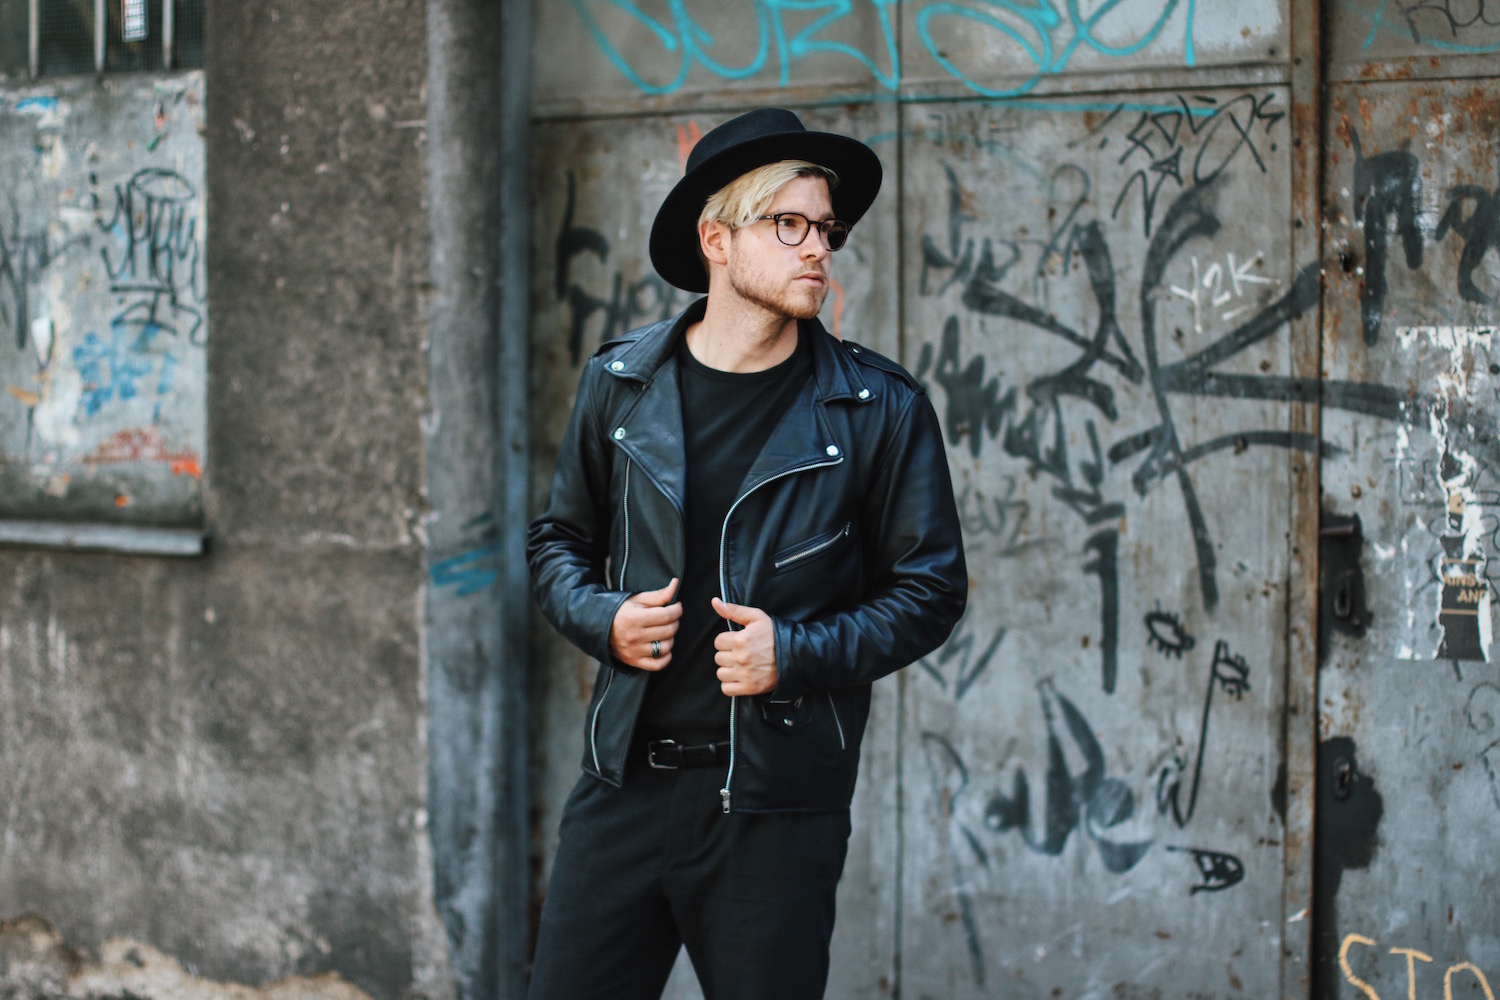 Outfit_All Black Viennese Hipster Look_Viparo Biker Jacket_Hat_Huarache_Allsaints_Meanwhile in Awesometown Austrian Mensfashion Blogger